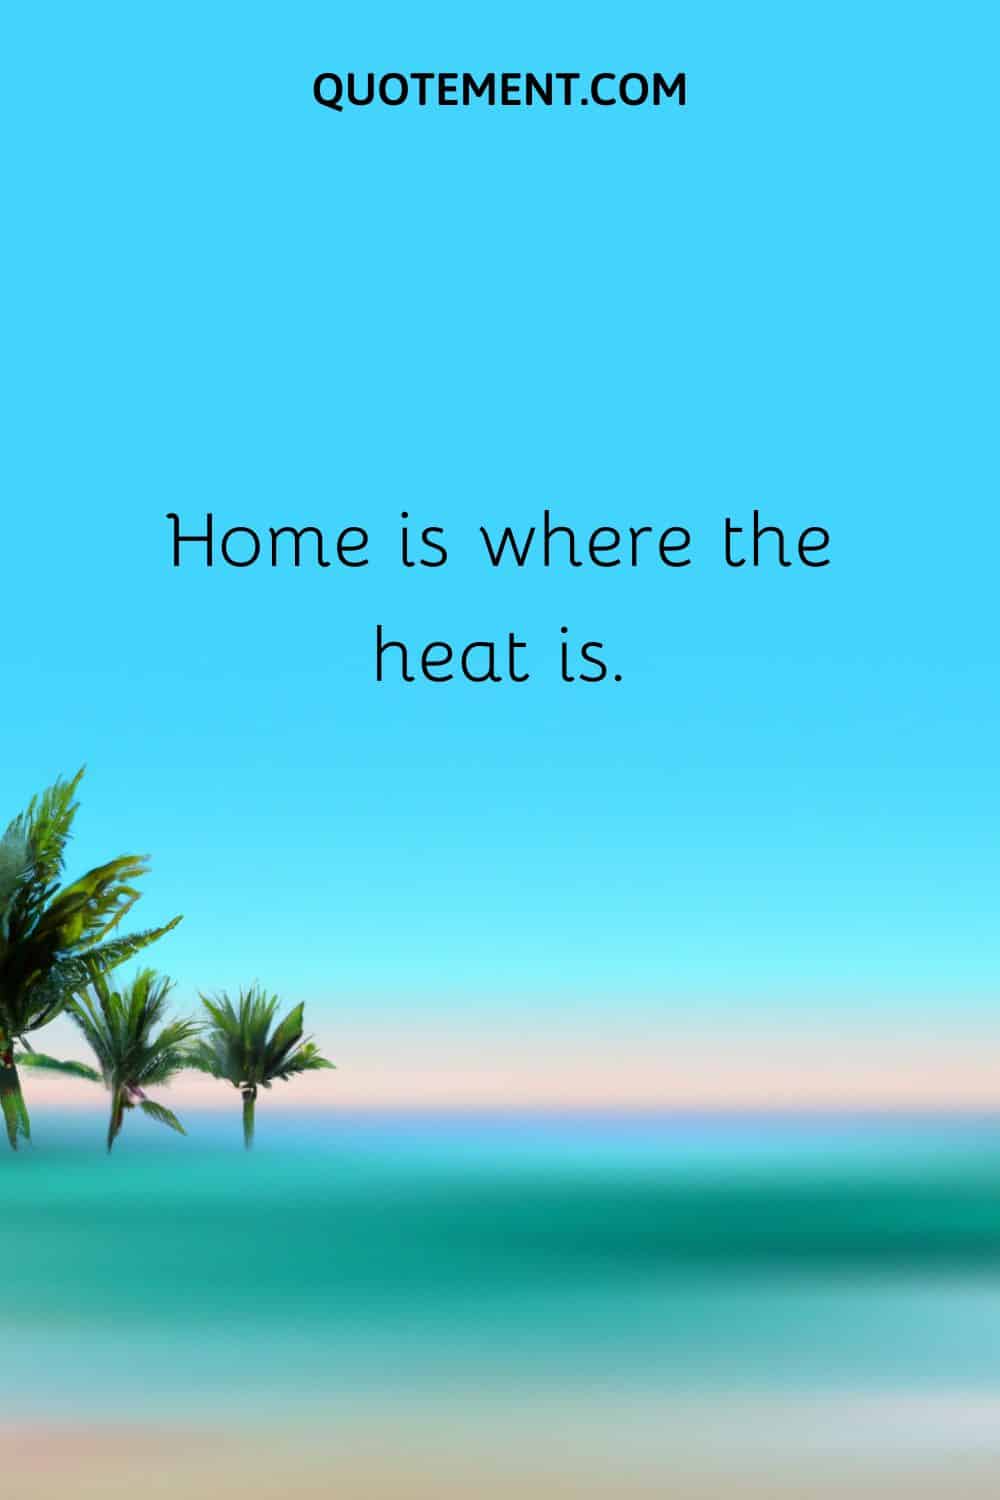 Home is where the heat is